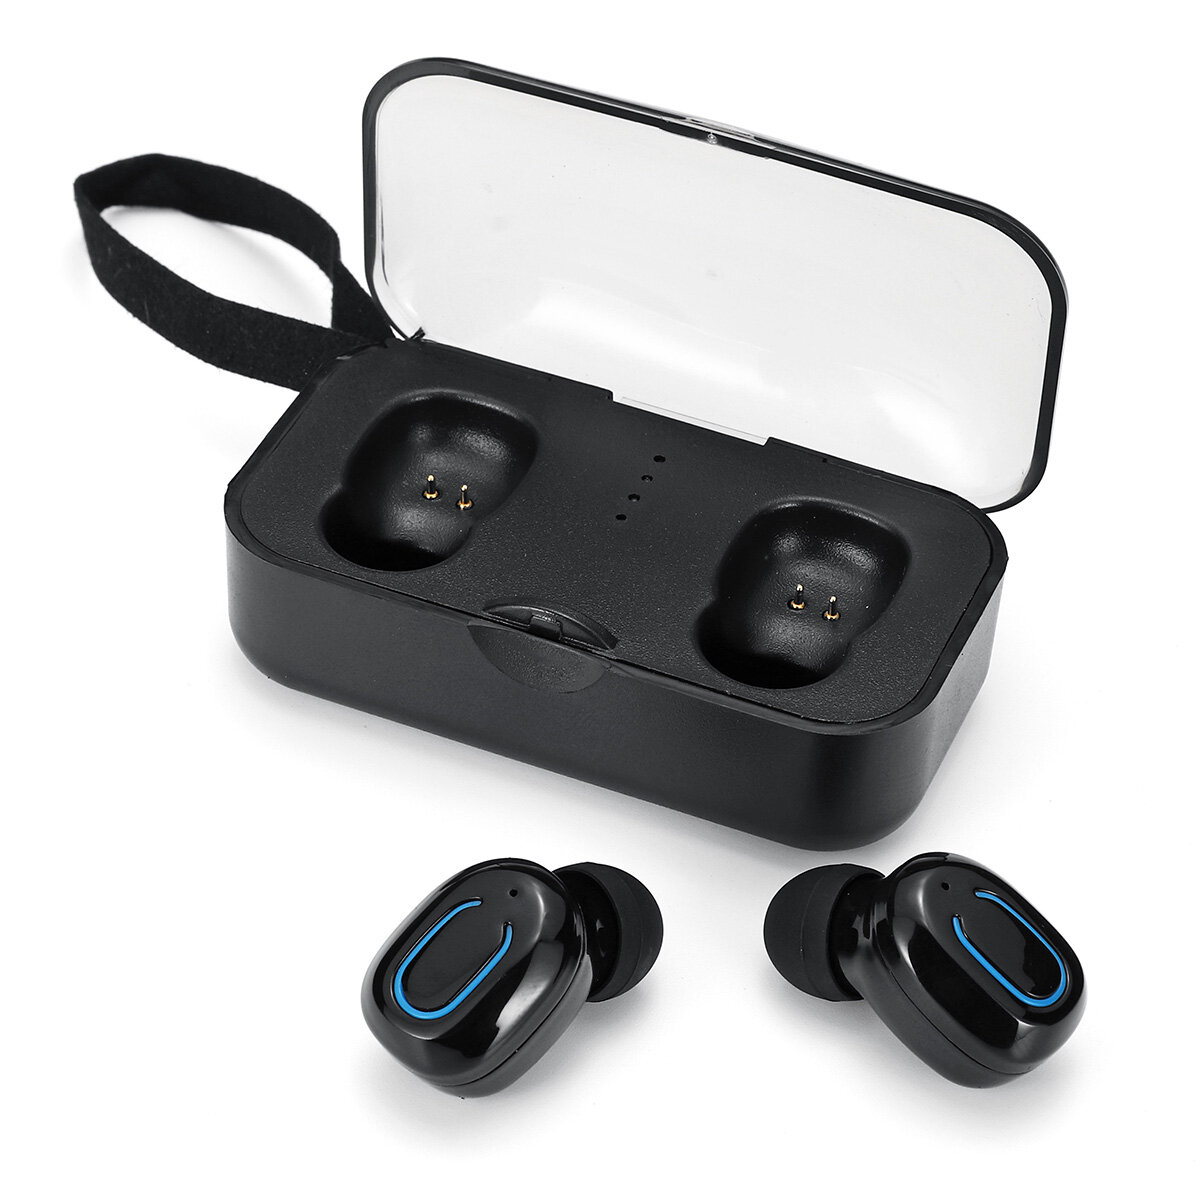 T18S TWS Wireless Earbuds bluetooth 5.0 Earphone Mini Portable Stereo Headphone with Mic for iPhone 